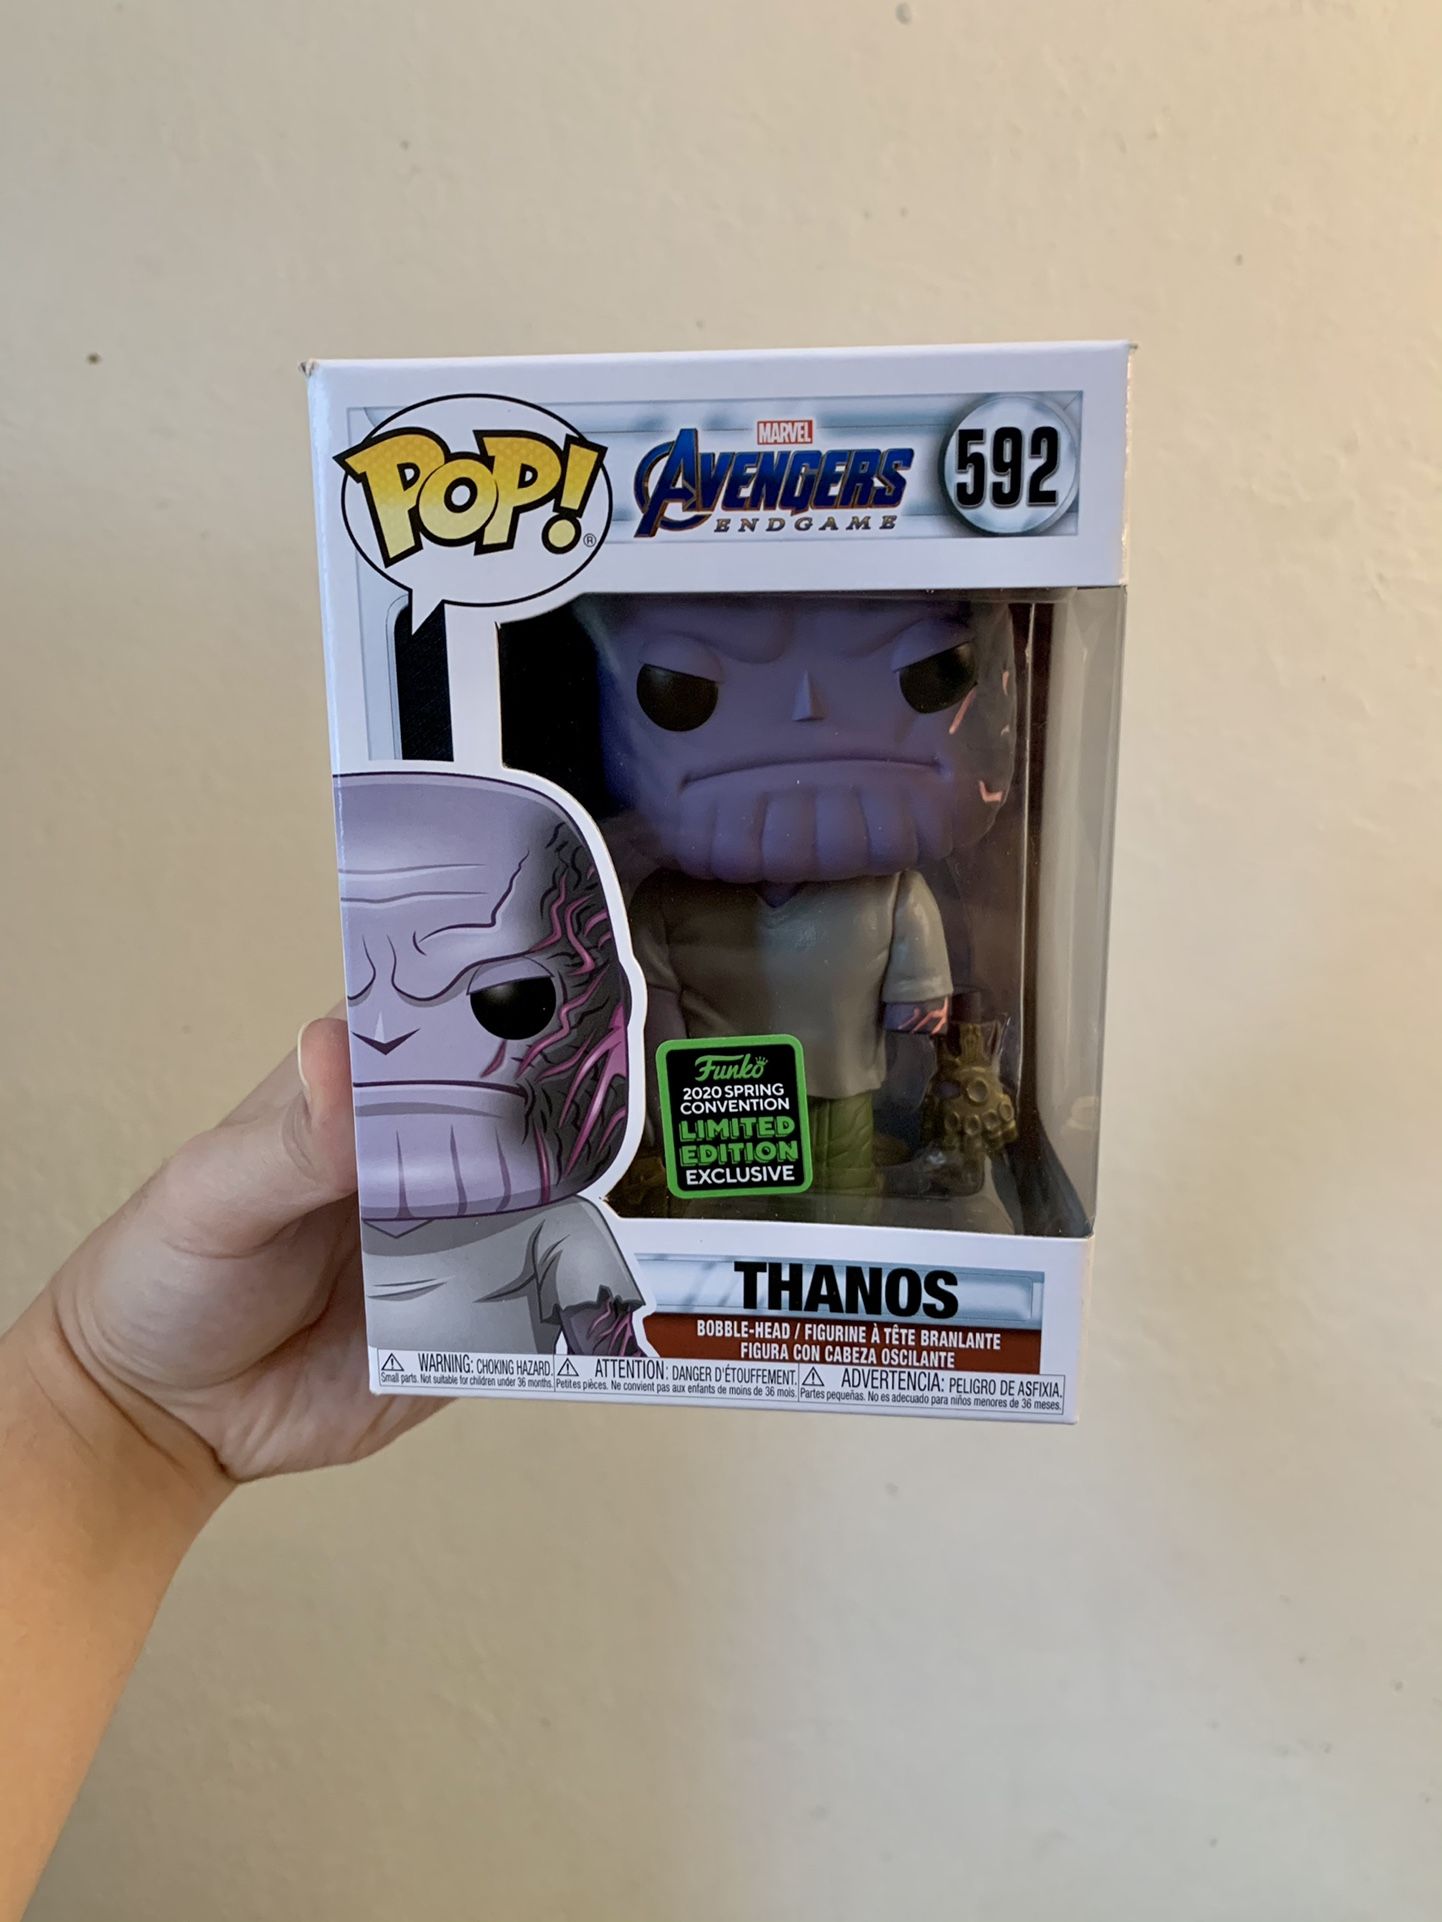 Funko Pop 2020 Spring Convention Exclusive Thanos with Removable Arm Figure